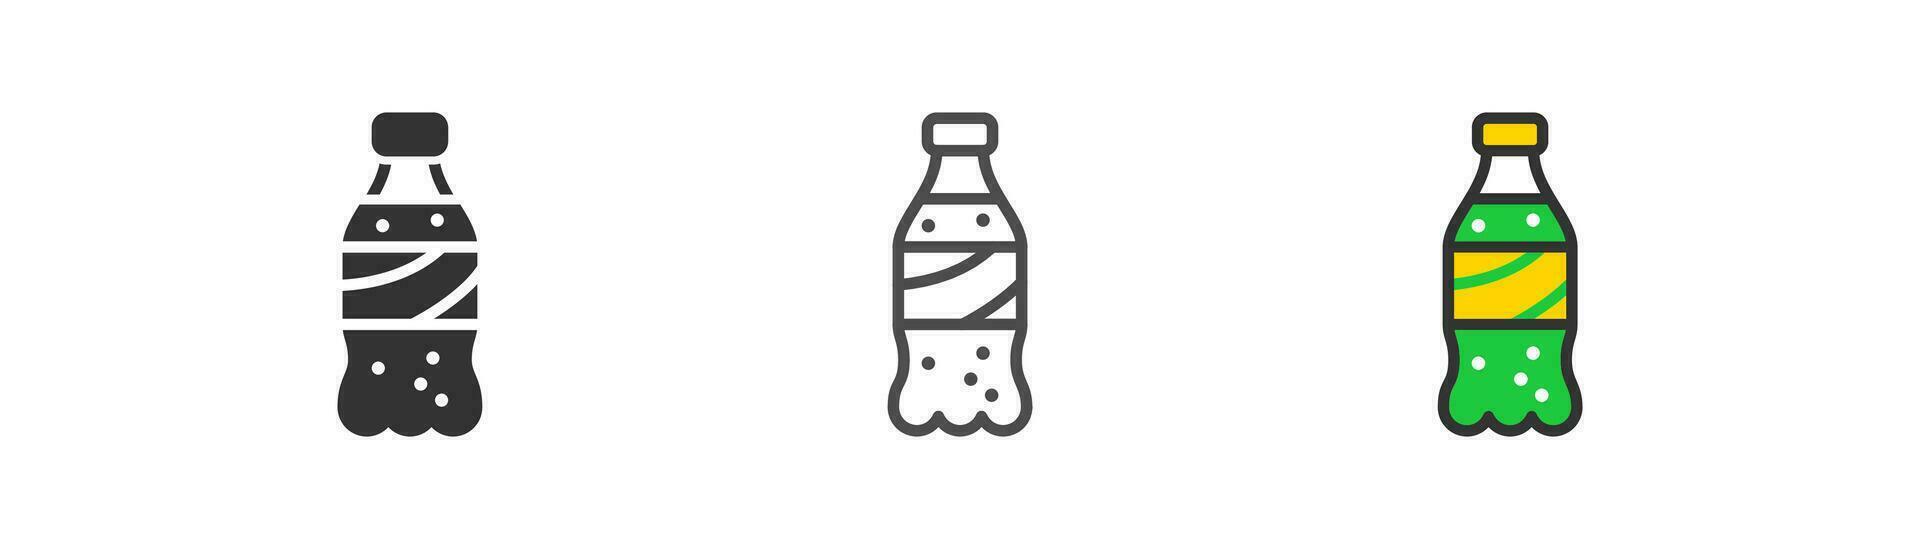 Soda in plastic bottle icon. Cold beverage symbol. Carbonated drink with different flavor. Outline, flat and colored style icon for web design. Vector illustration.